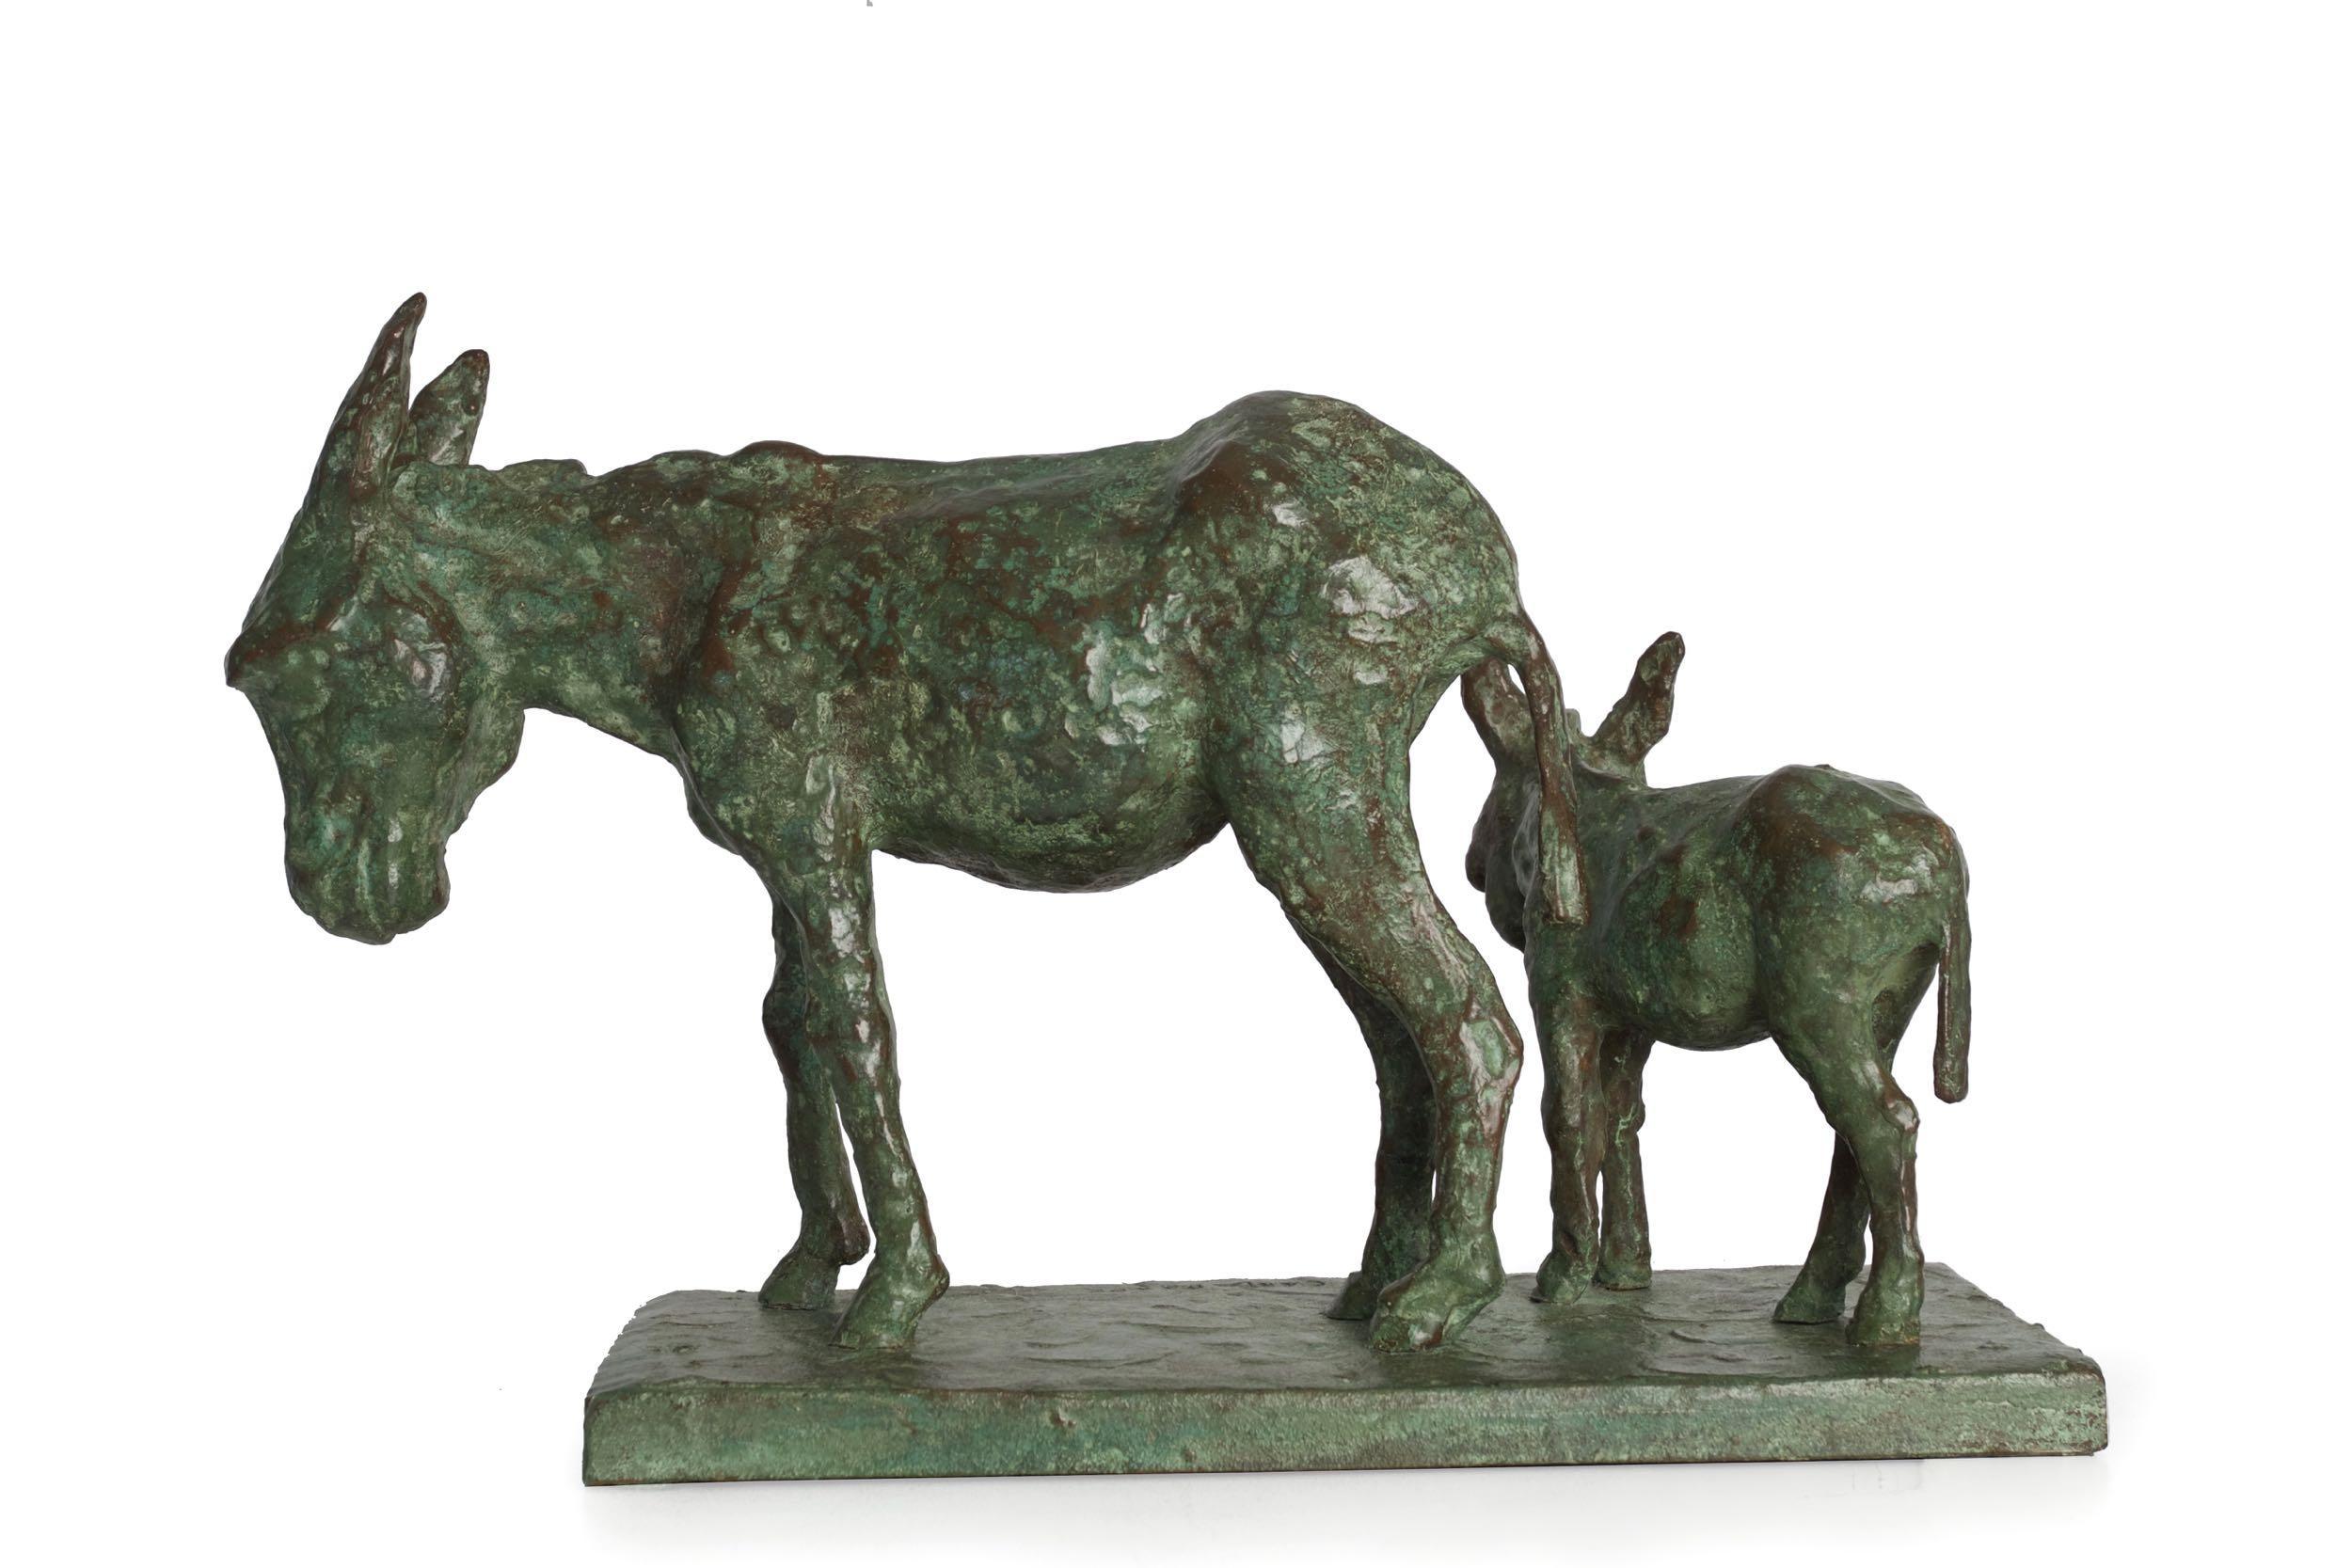 An outstanding modernist representation of this curious creature and its young foal, the impressionistic nature of the casting leaves the surface so rich with texture and while the adherence to anatomical accuracy is loosely maintained there is a